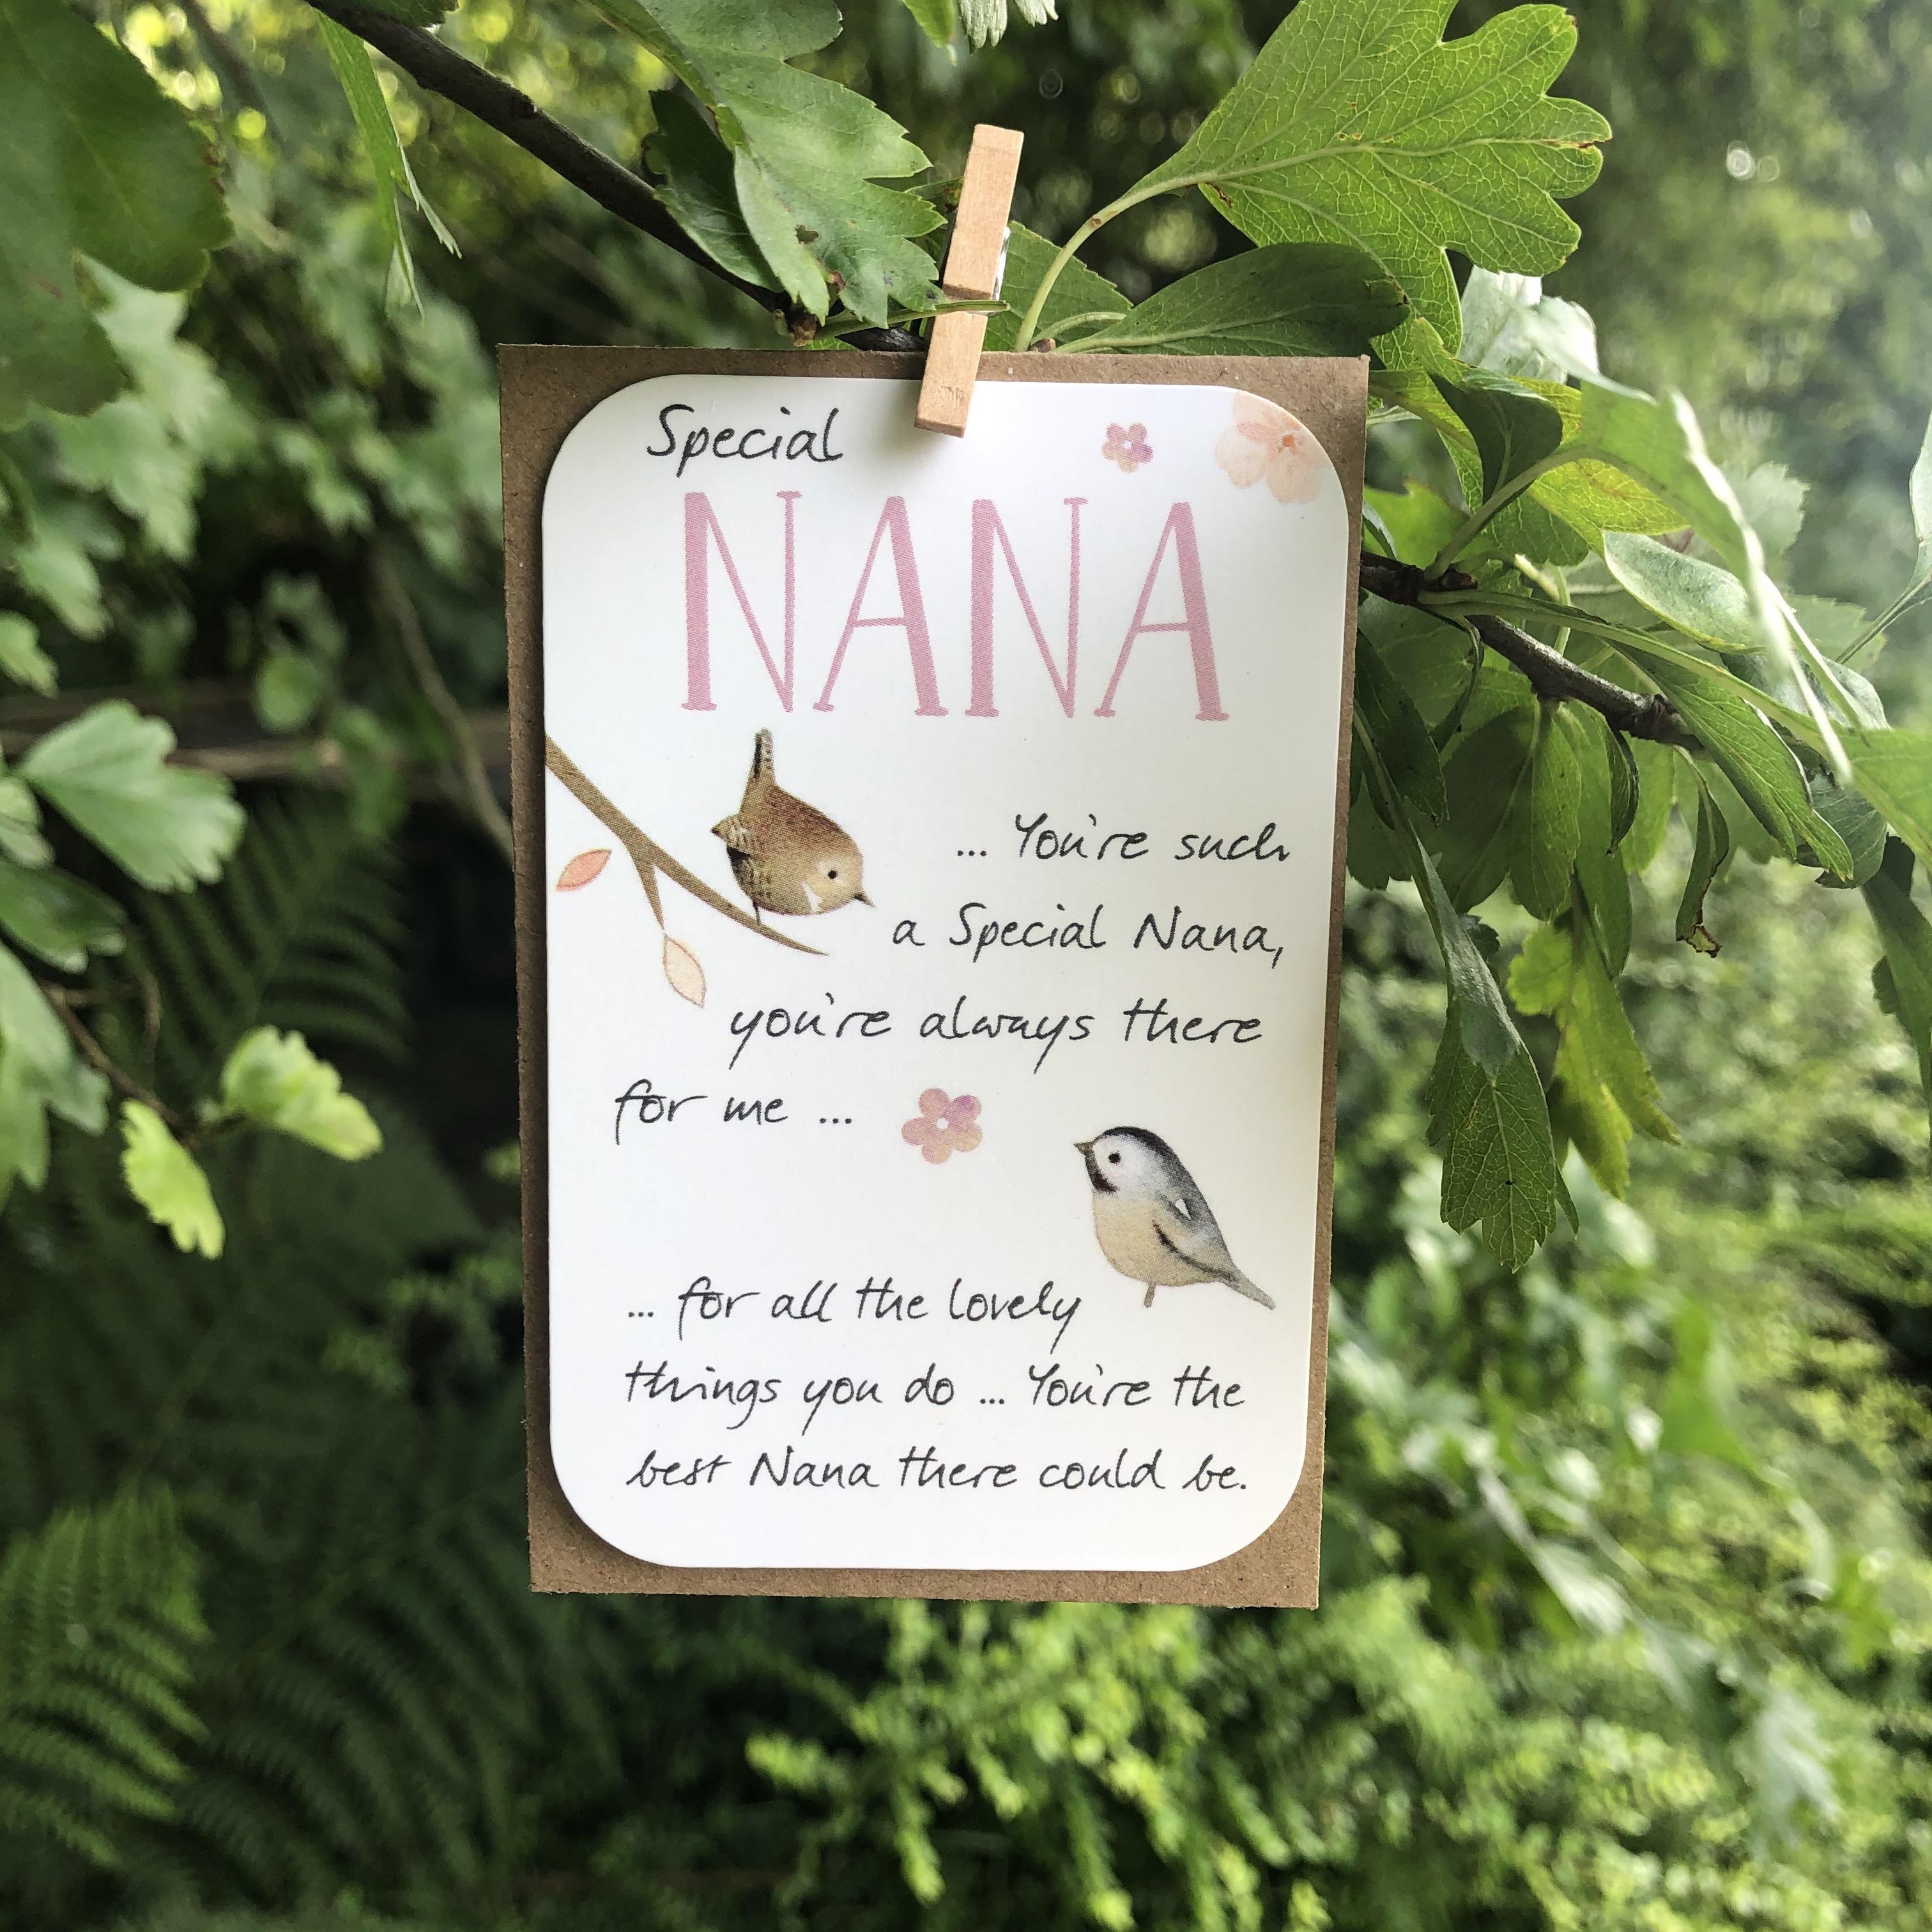 A small keepsake card with a Nana caption, and lovely little verse